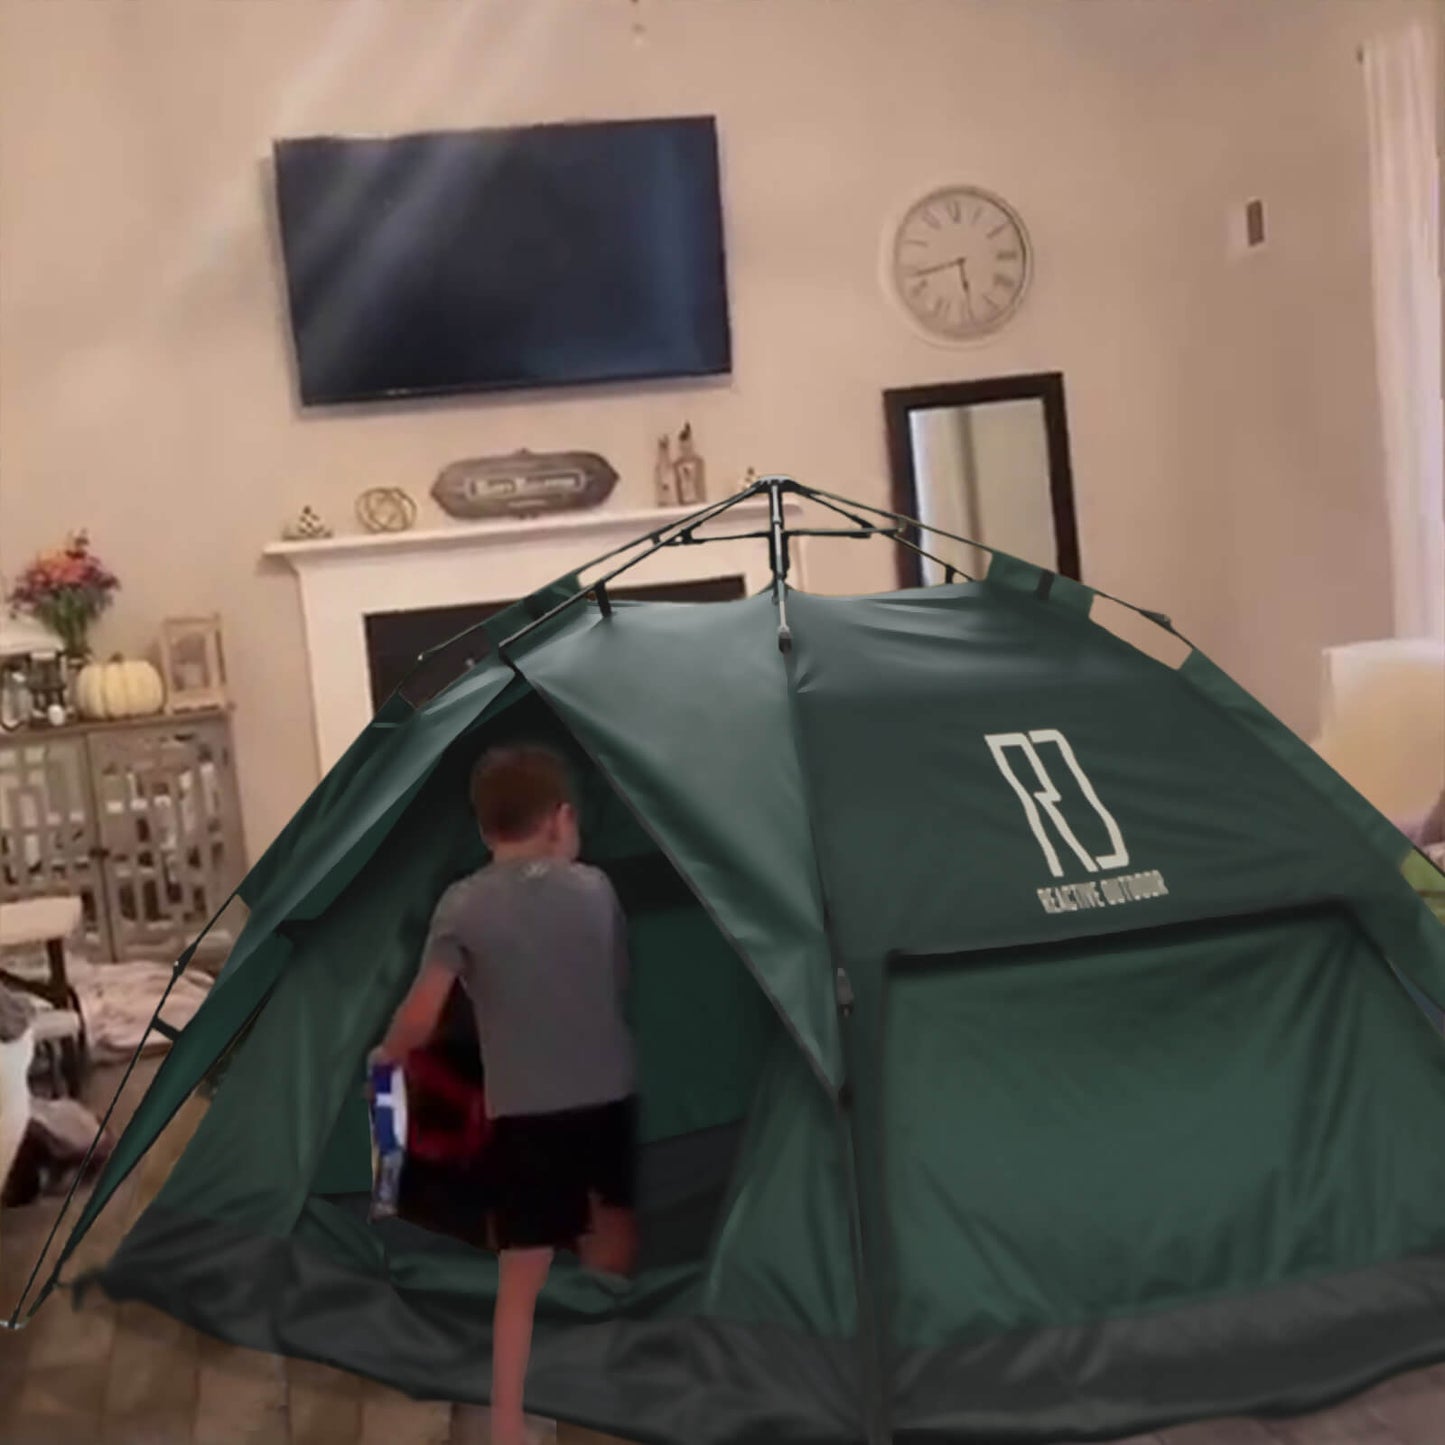 Large-Sized 3Secs Tent (For 2-3 Person, UK)